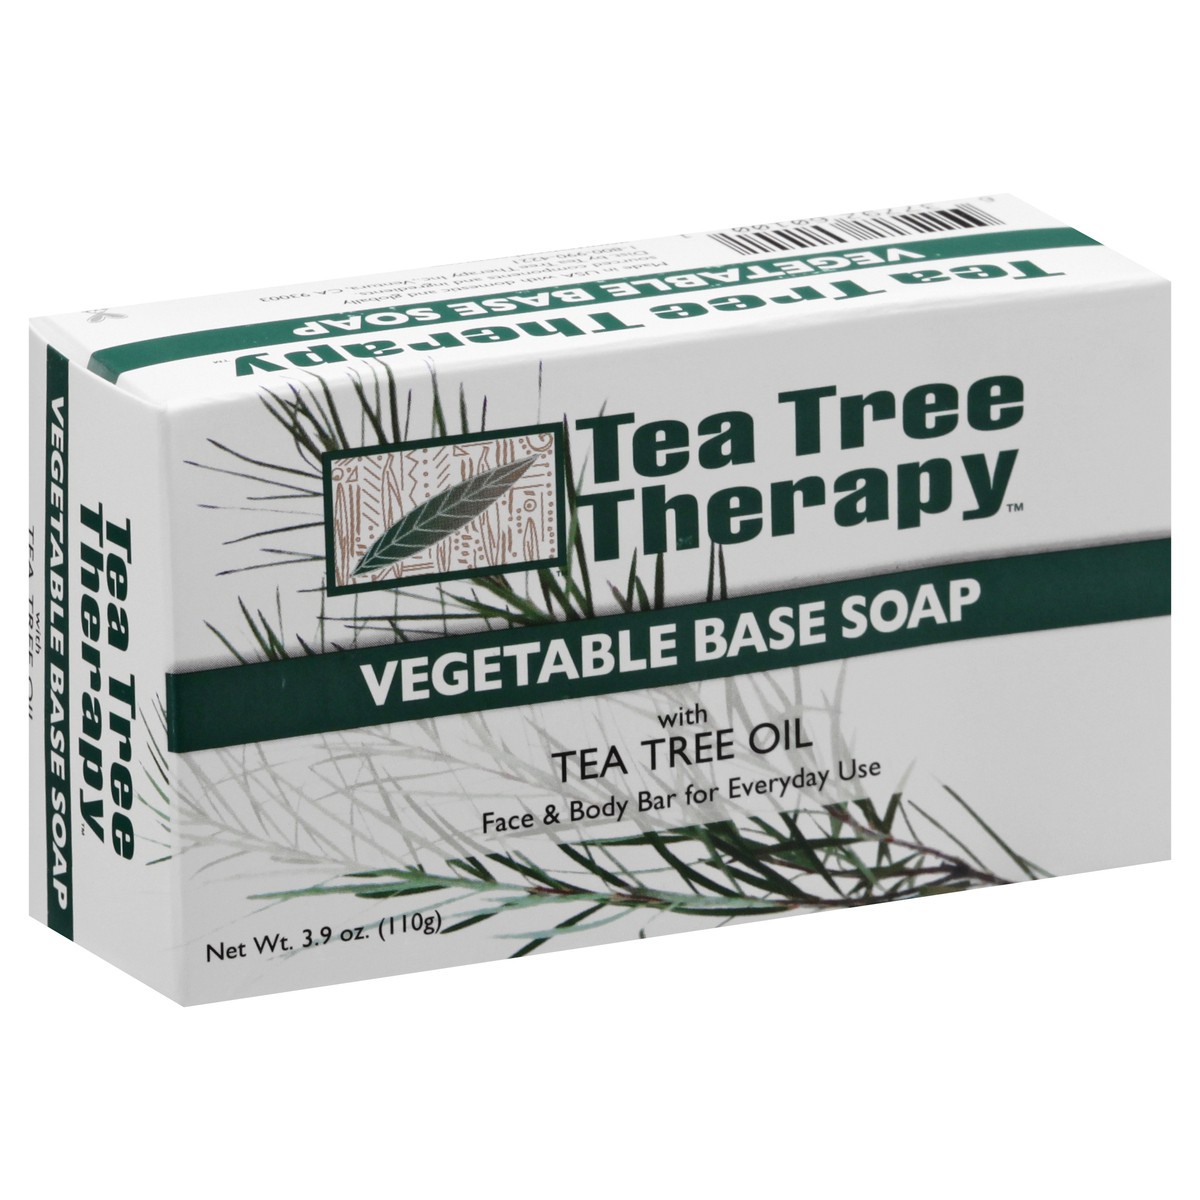 slide 12 of 12, Tea Tree Therapy Vegetable Base Soap With Tea Tree Oil, 3.9 oz